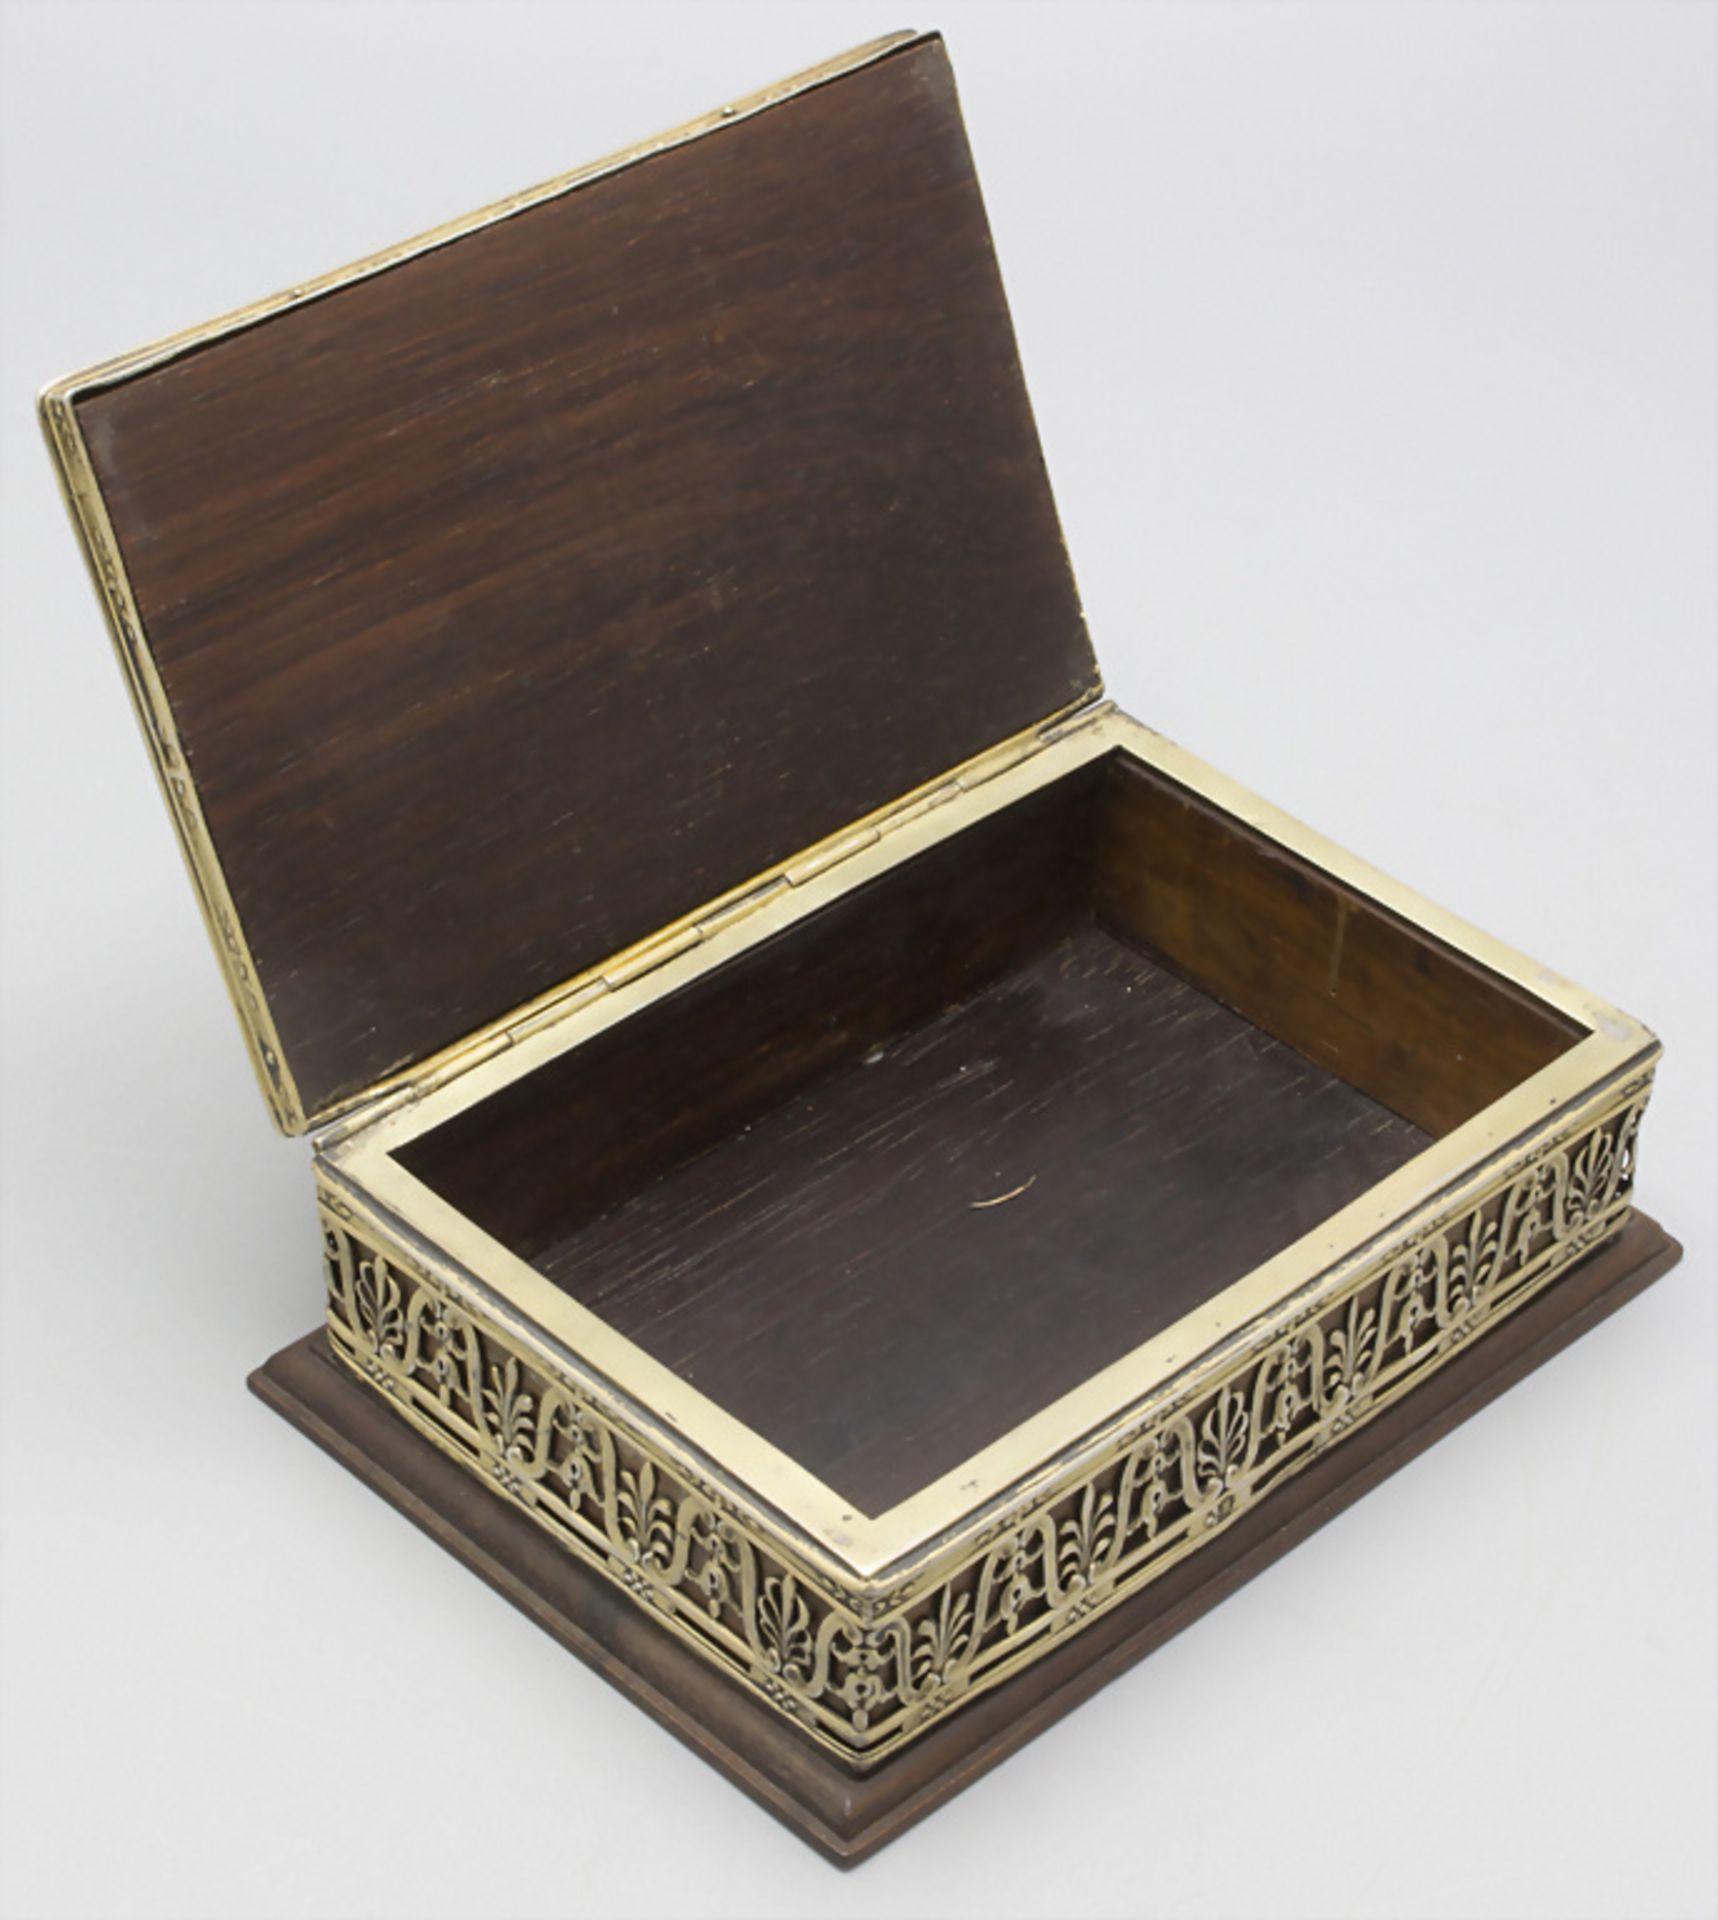 Holzschatulle mit Silbermontur / A wooden casket with silver mount, Emile Langlois, Paris, ... - Image 3 of 4